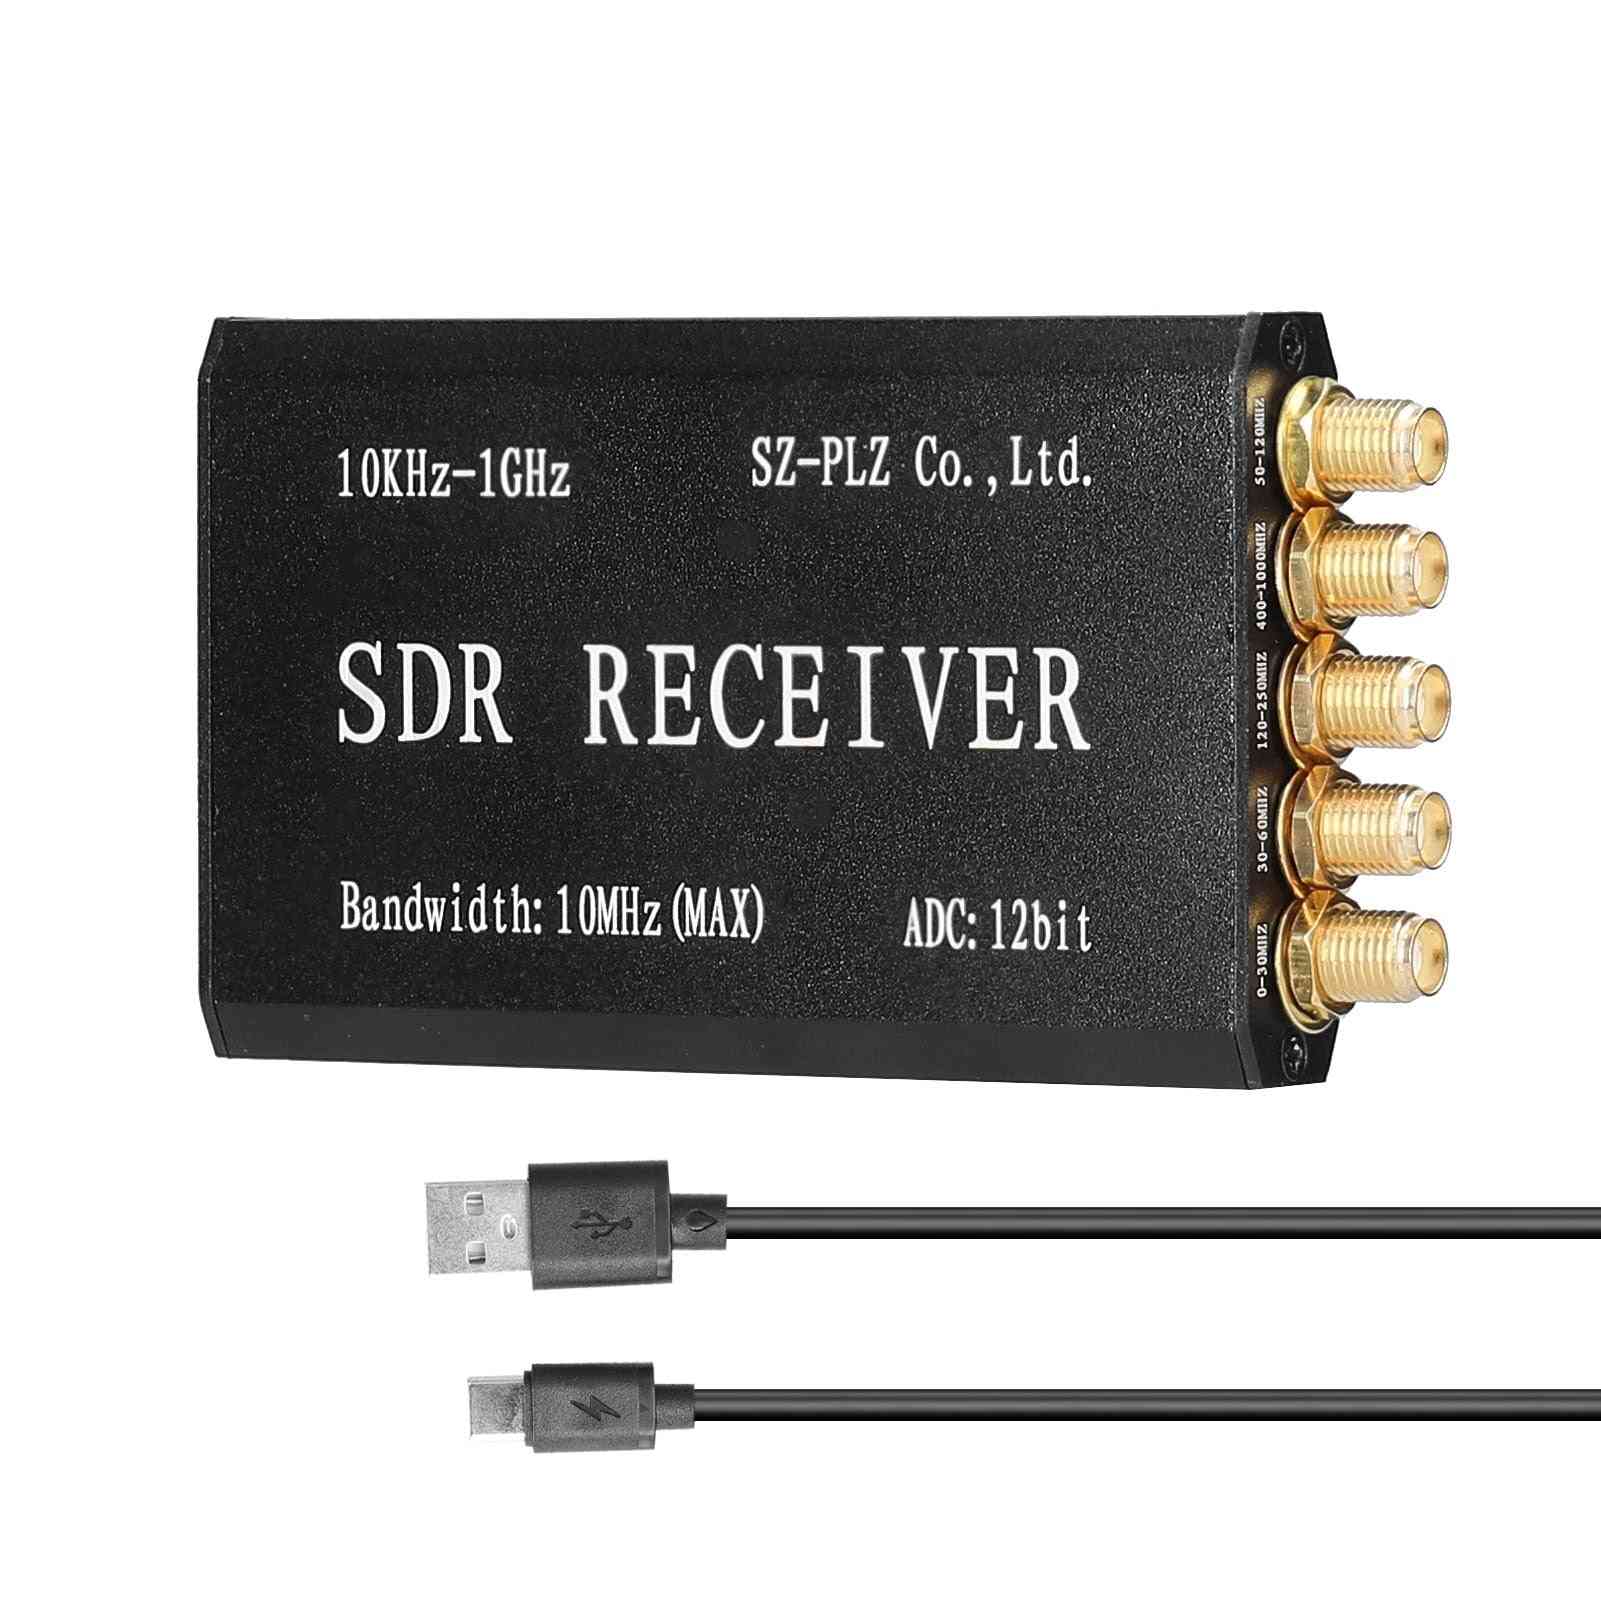 Rsp1 Msi2500/001 Simplified Software Defined Sdr Reciver